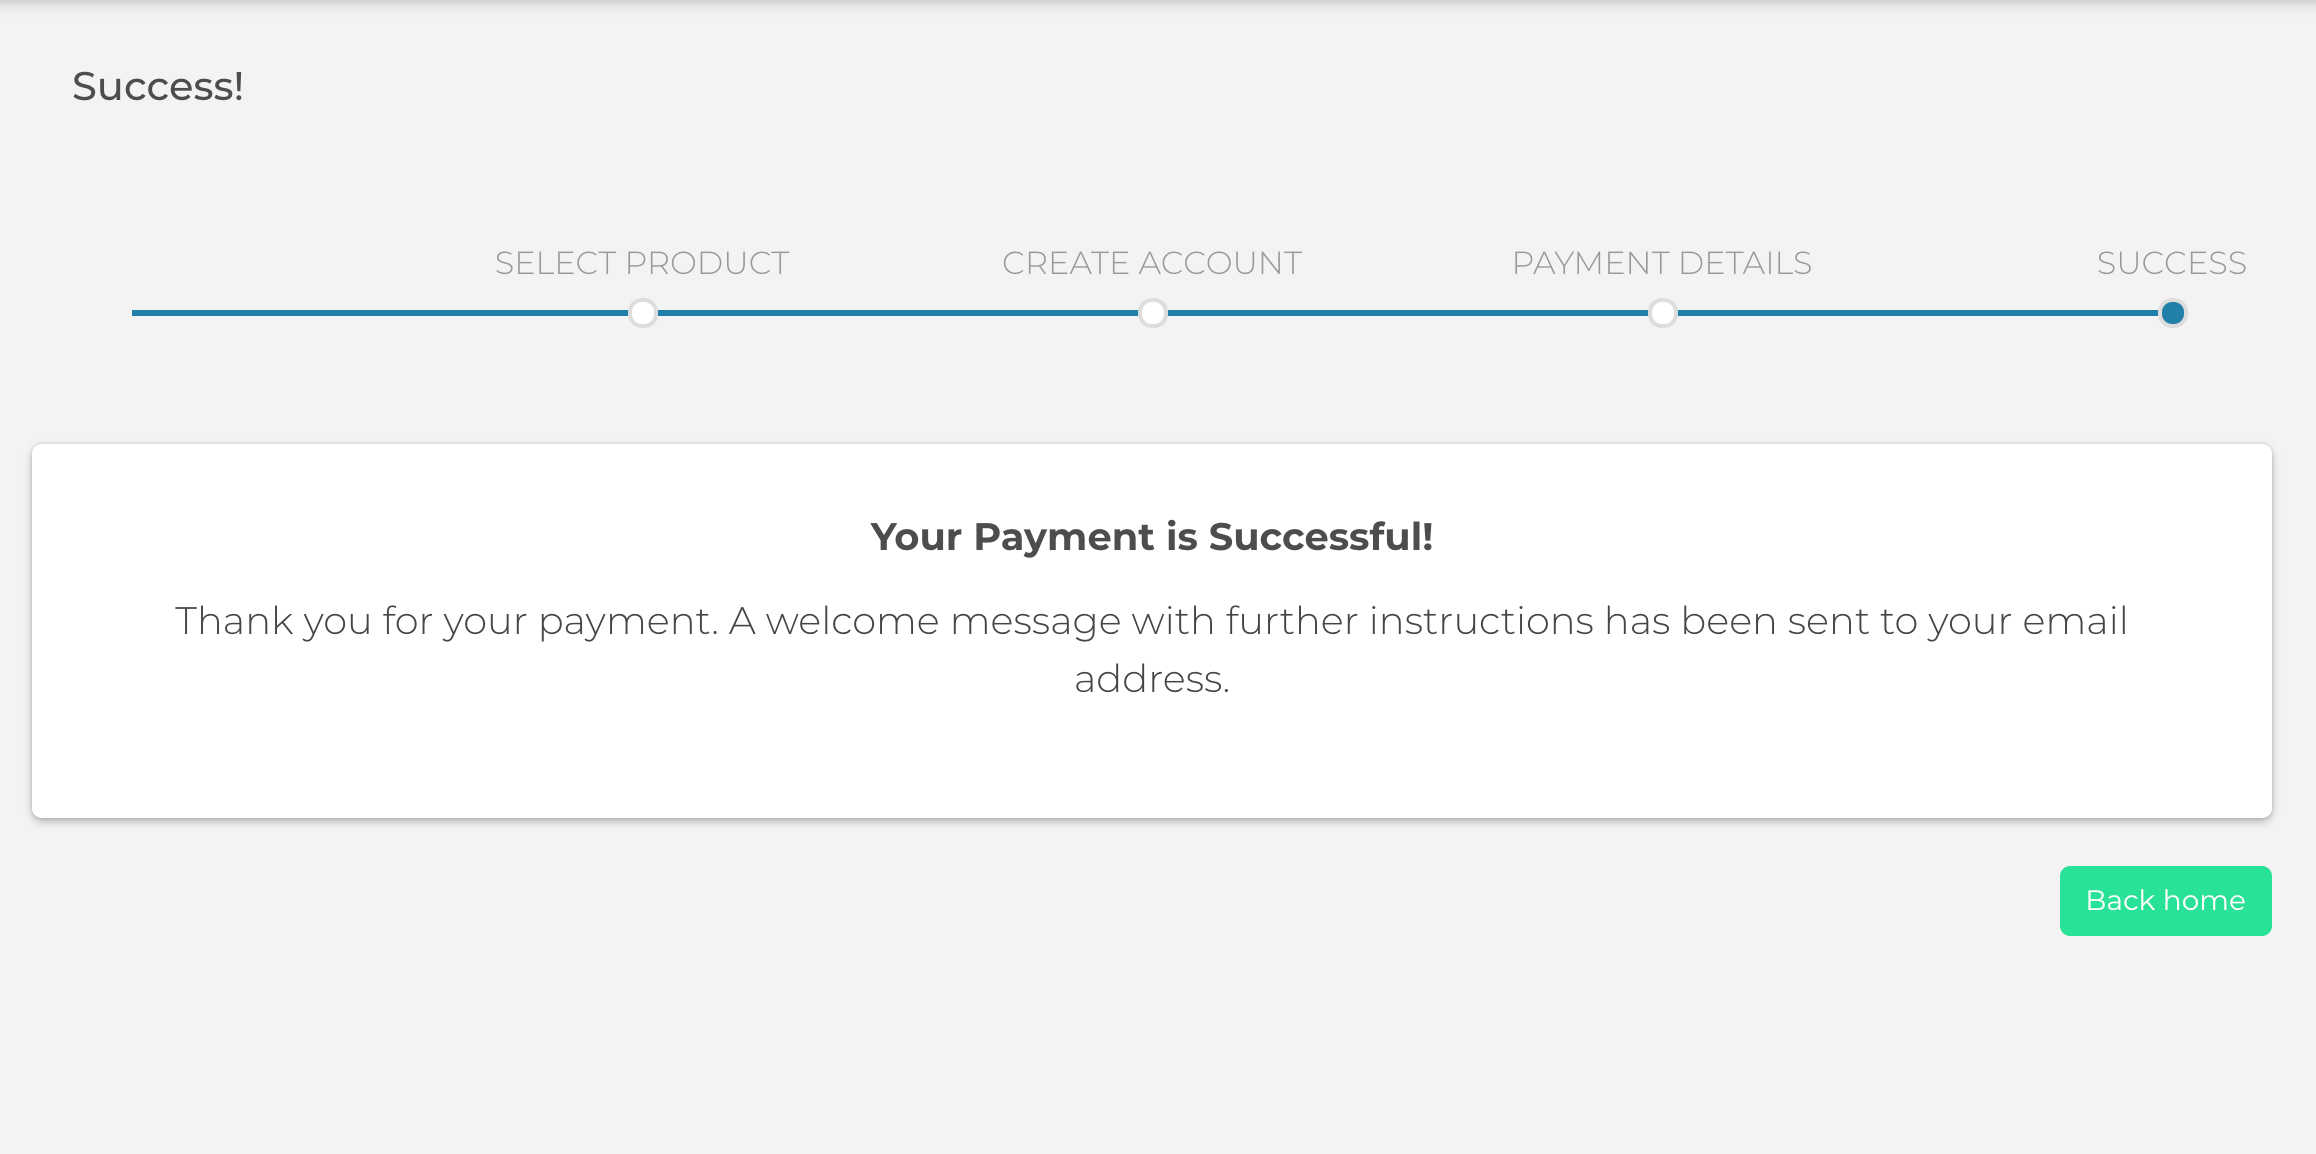 Your payment is successful!